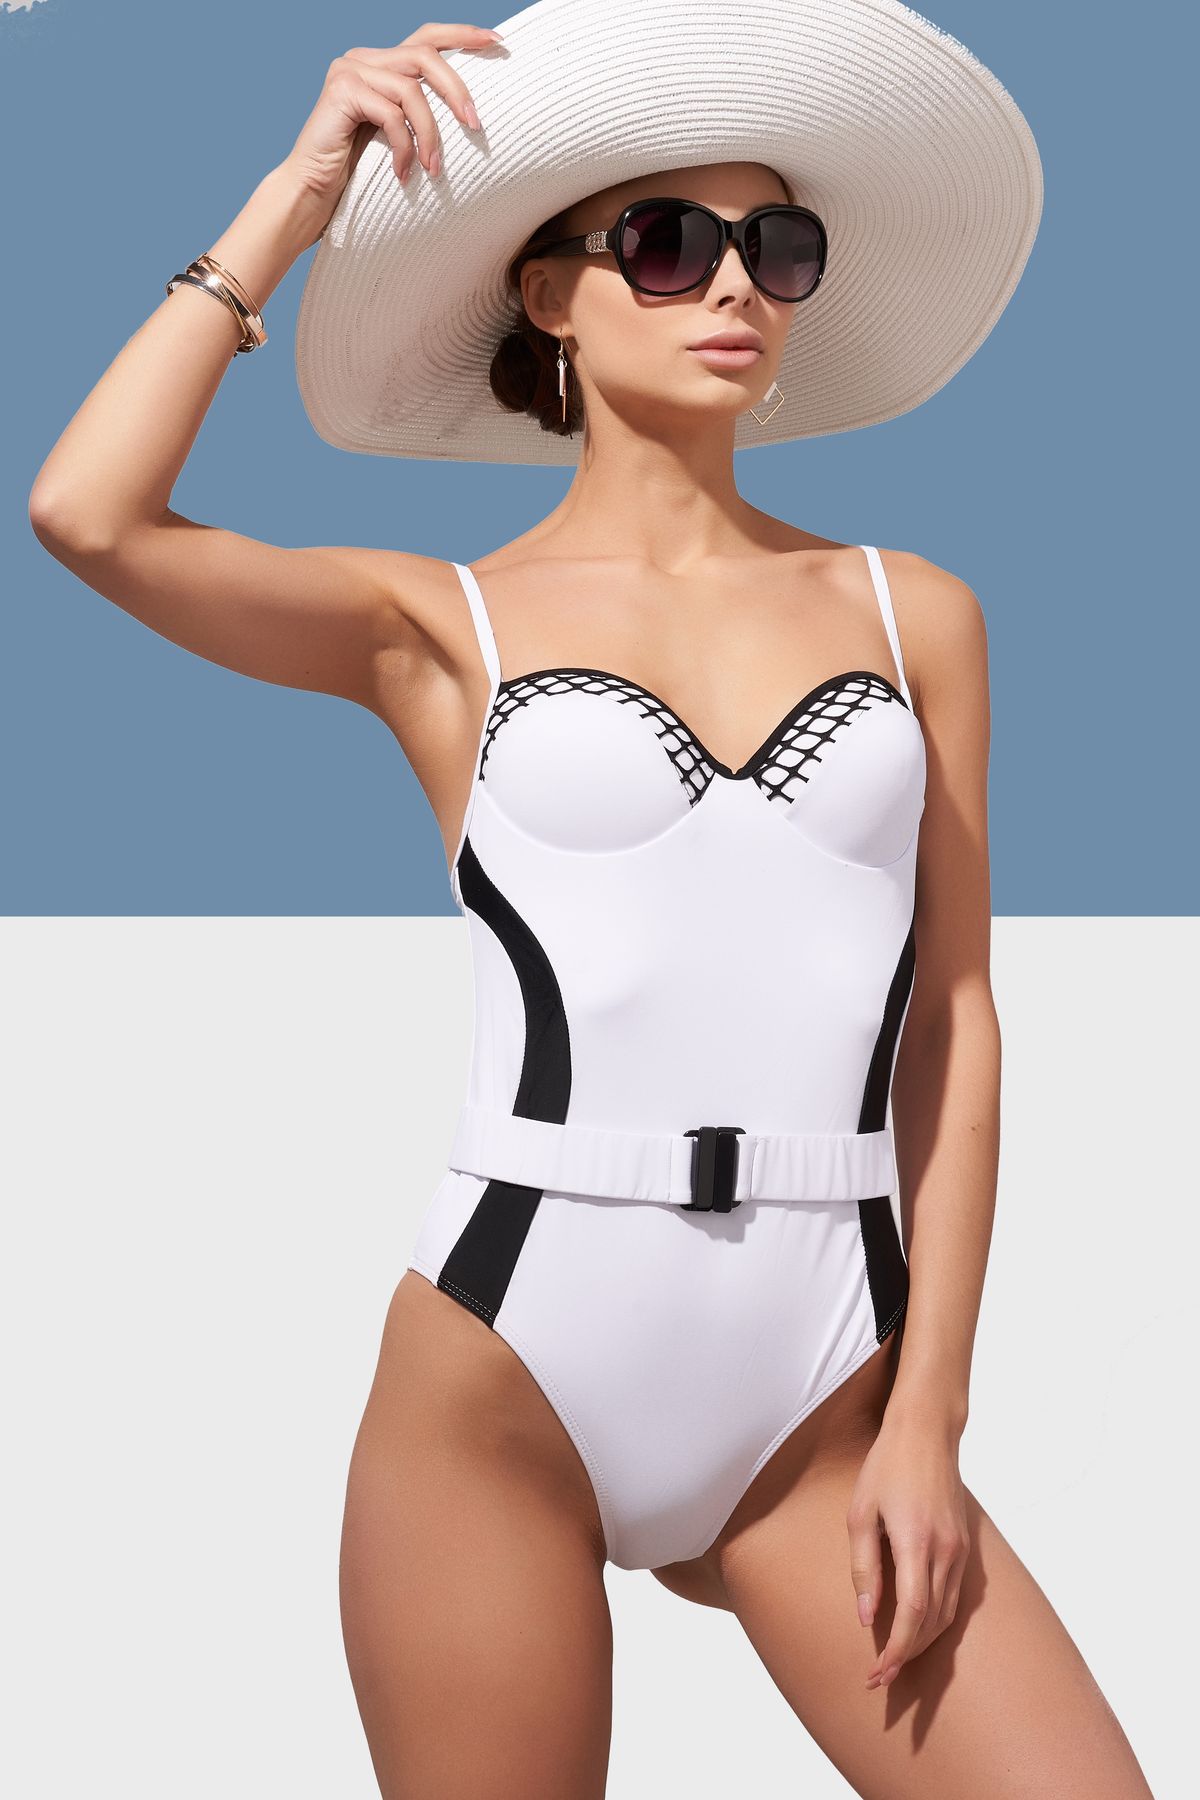 Elegant,Lady,In,White,Wide-brimmed,Hat,And,Sunglasses,Is,Wearing